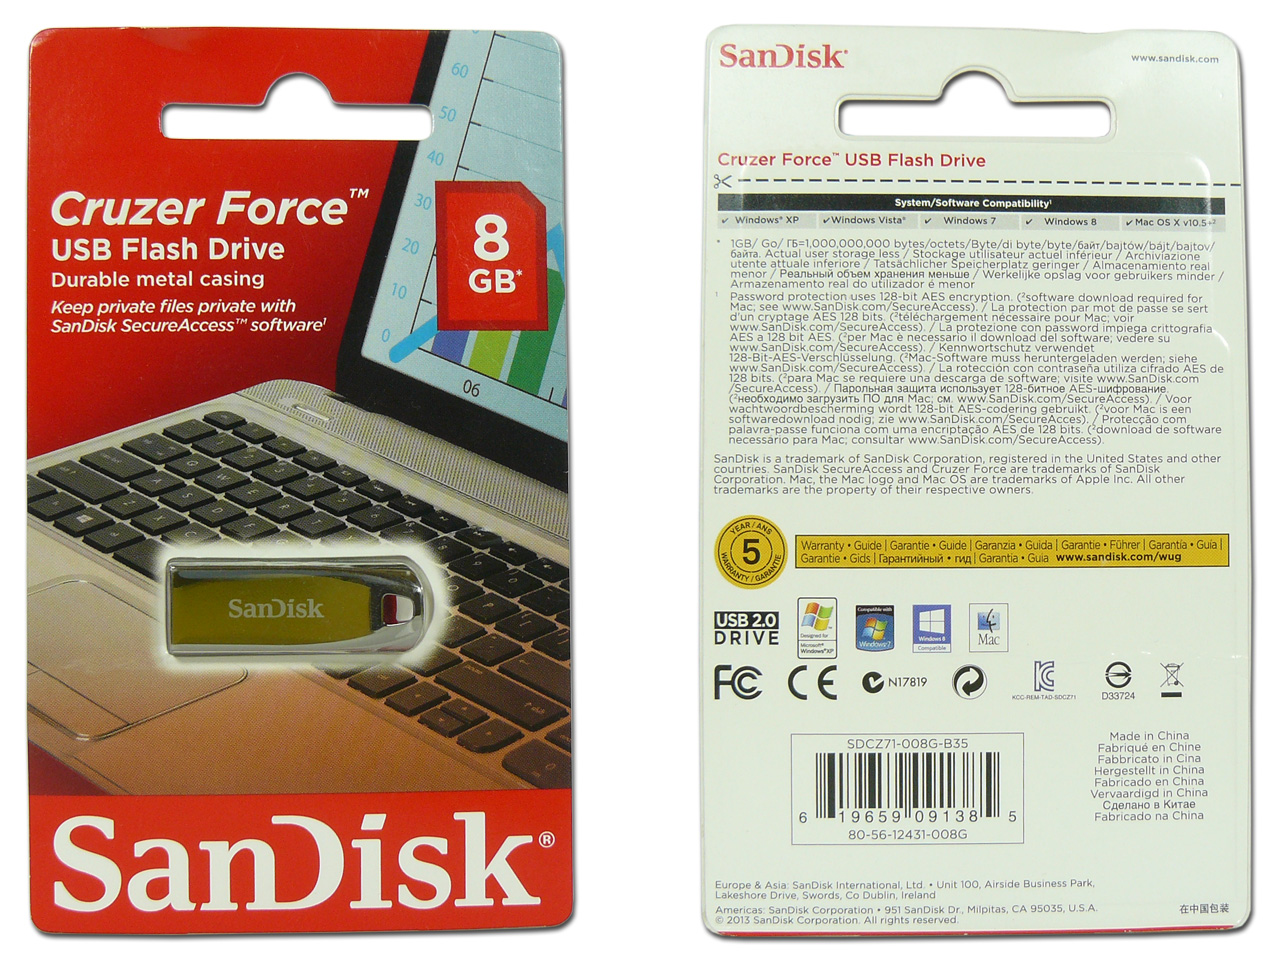 sandisk secure access v2.0 for mac users